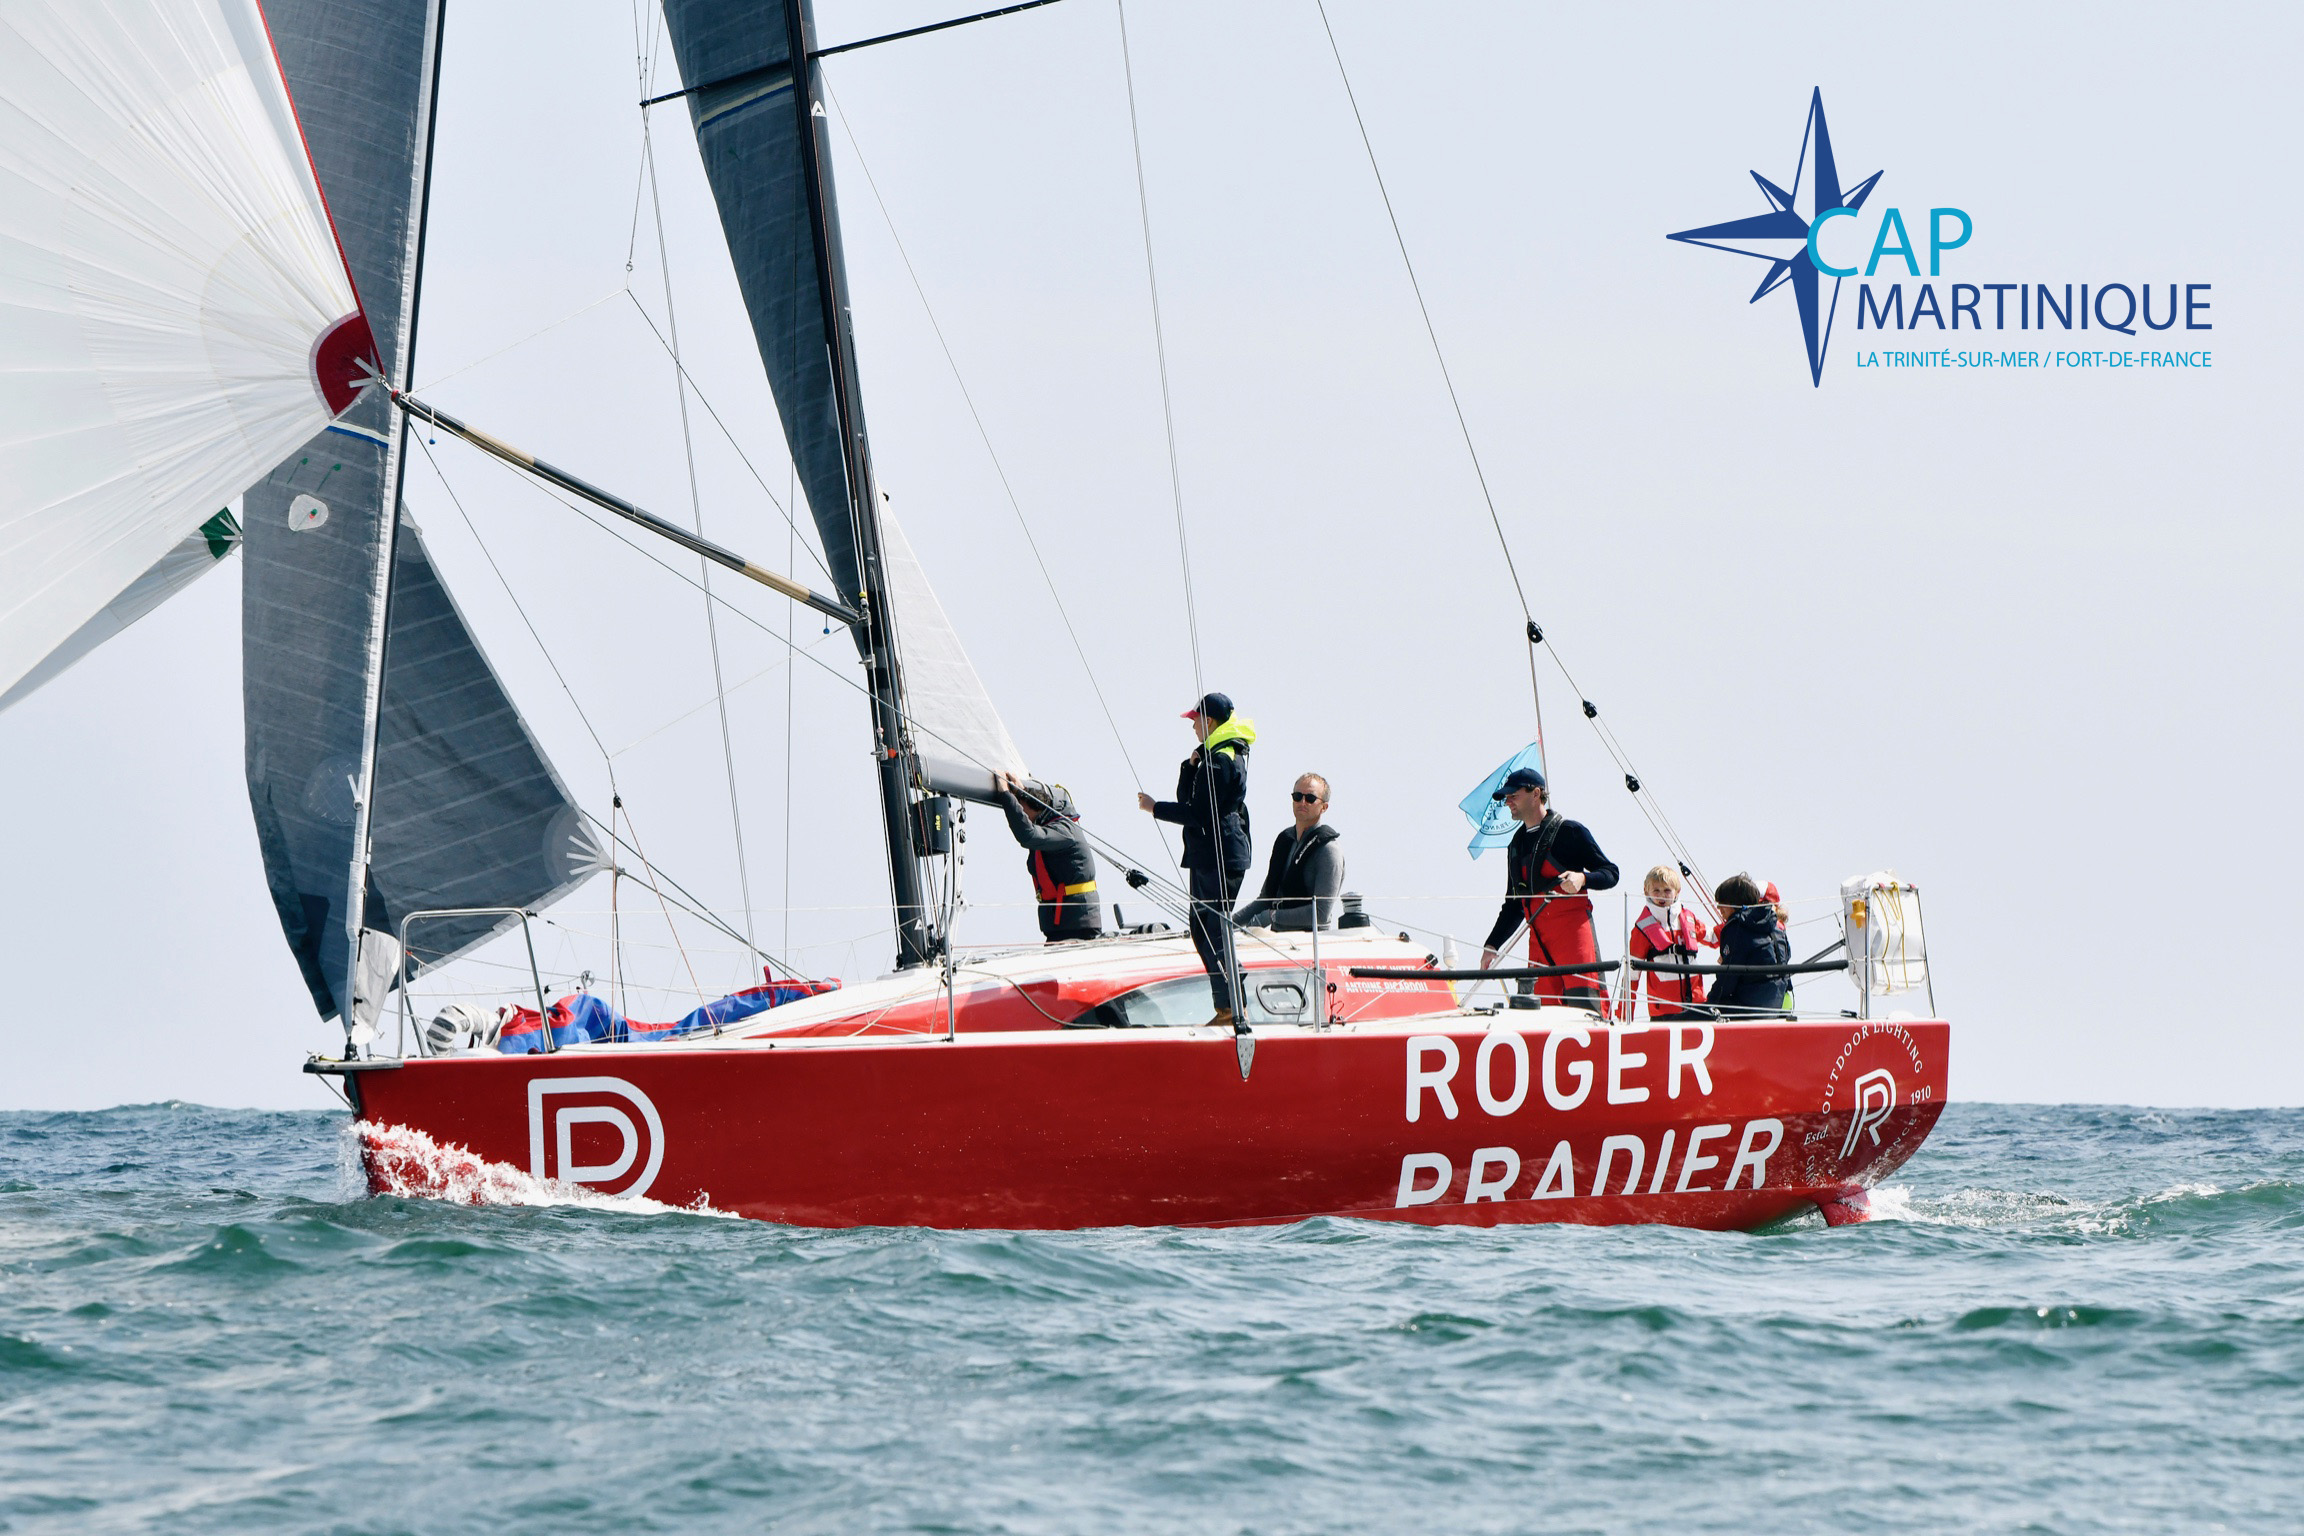 The Cap Martinique Transatlantic race is on! Roger Pradier ®, manufacturers of quality outdoor lighting, and Sécurlite, are sponsoring the #56 sailing boat – WITTE SPIRIT 2